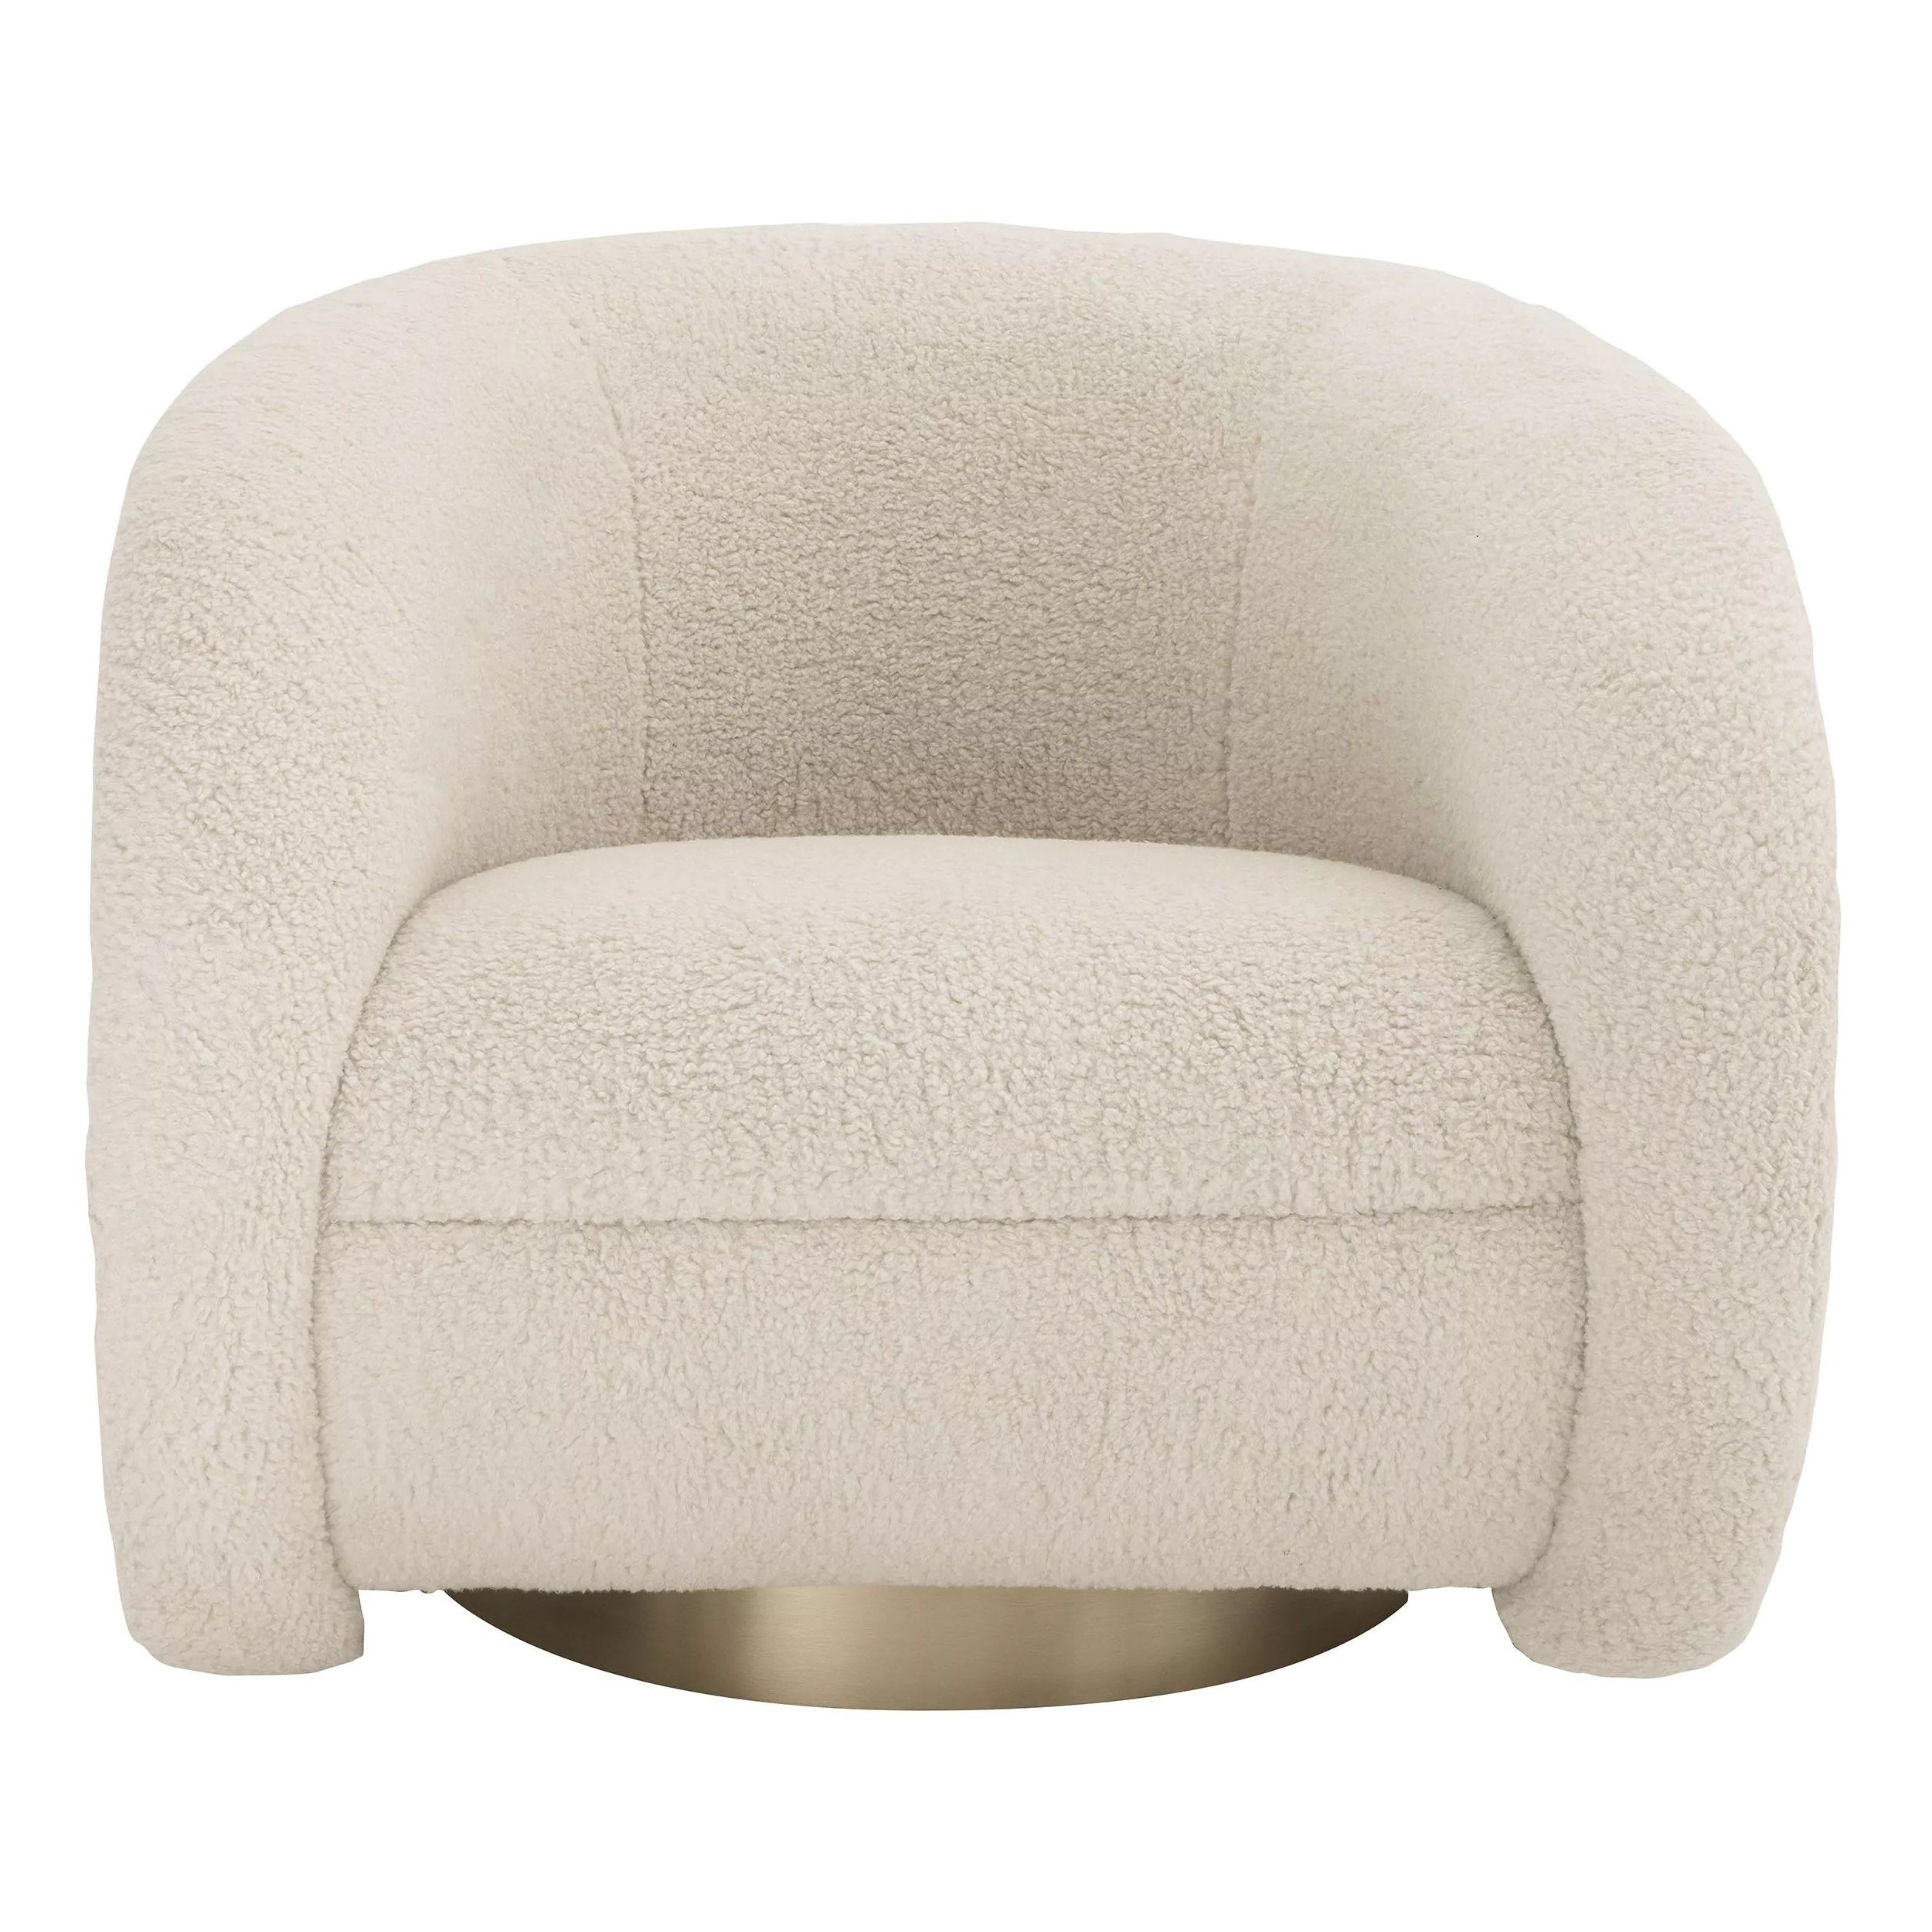 Beige Bouclé Fabric and Brass Finishes Swivel And Curved Armchair